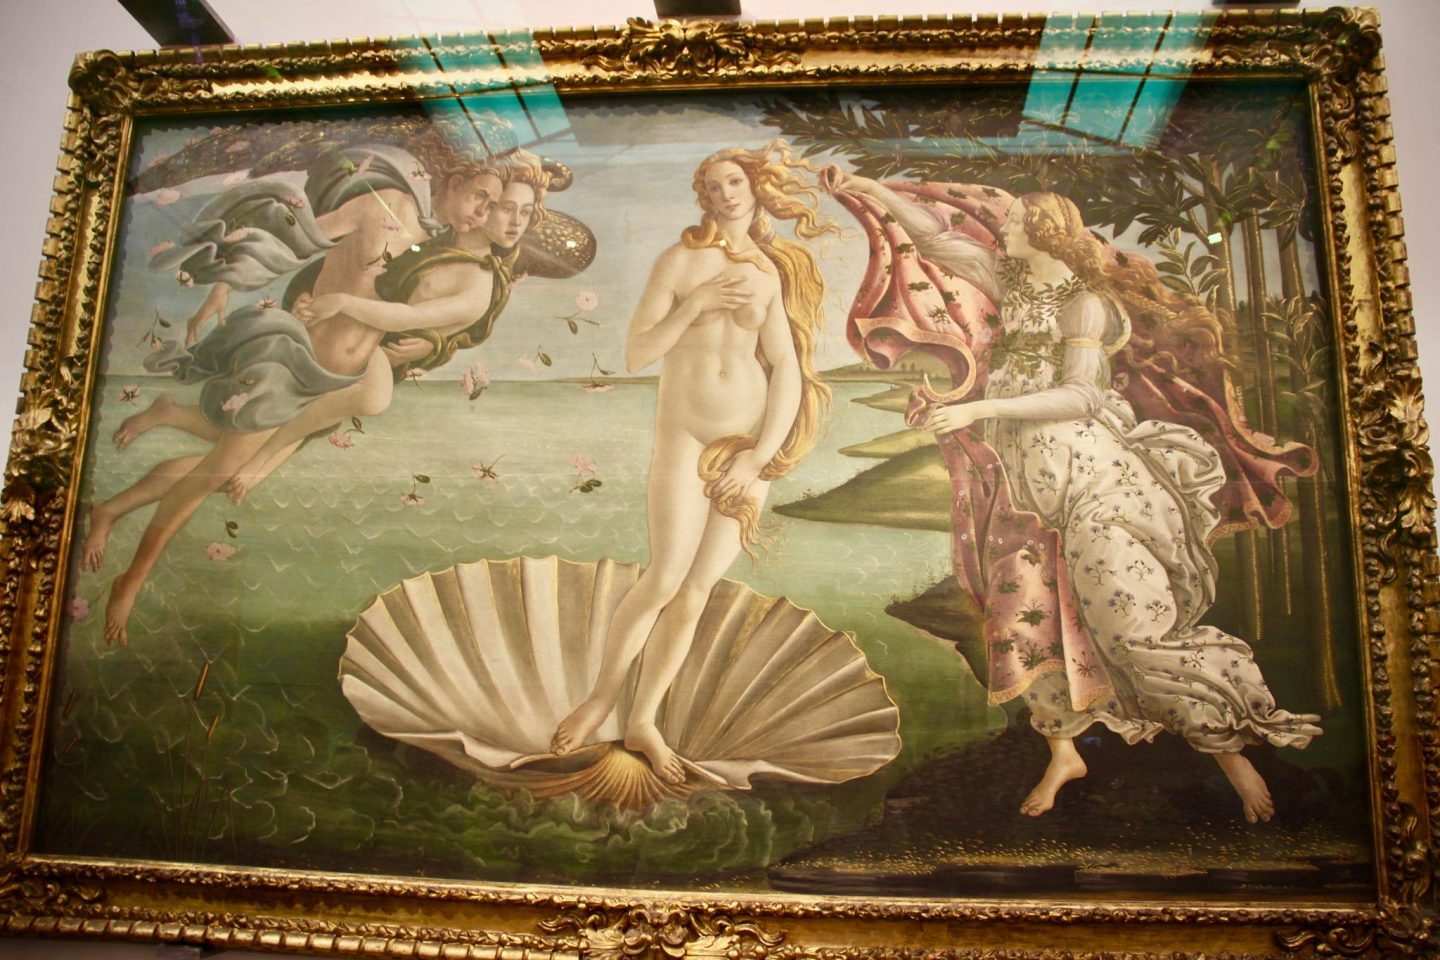 Uffizi Gallery Birth of Venus ... What to do in Florence ... The Spectacular Adventurer